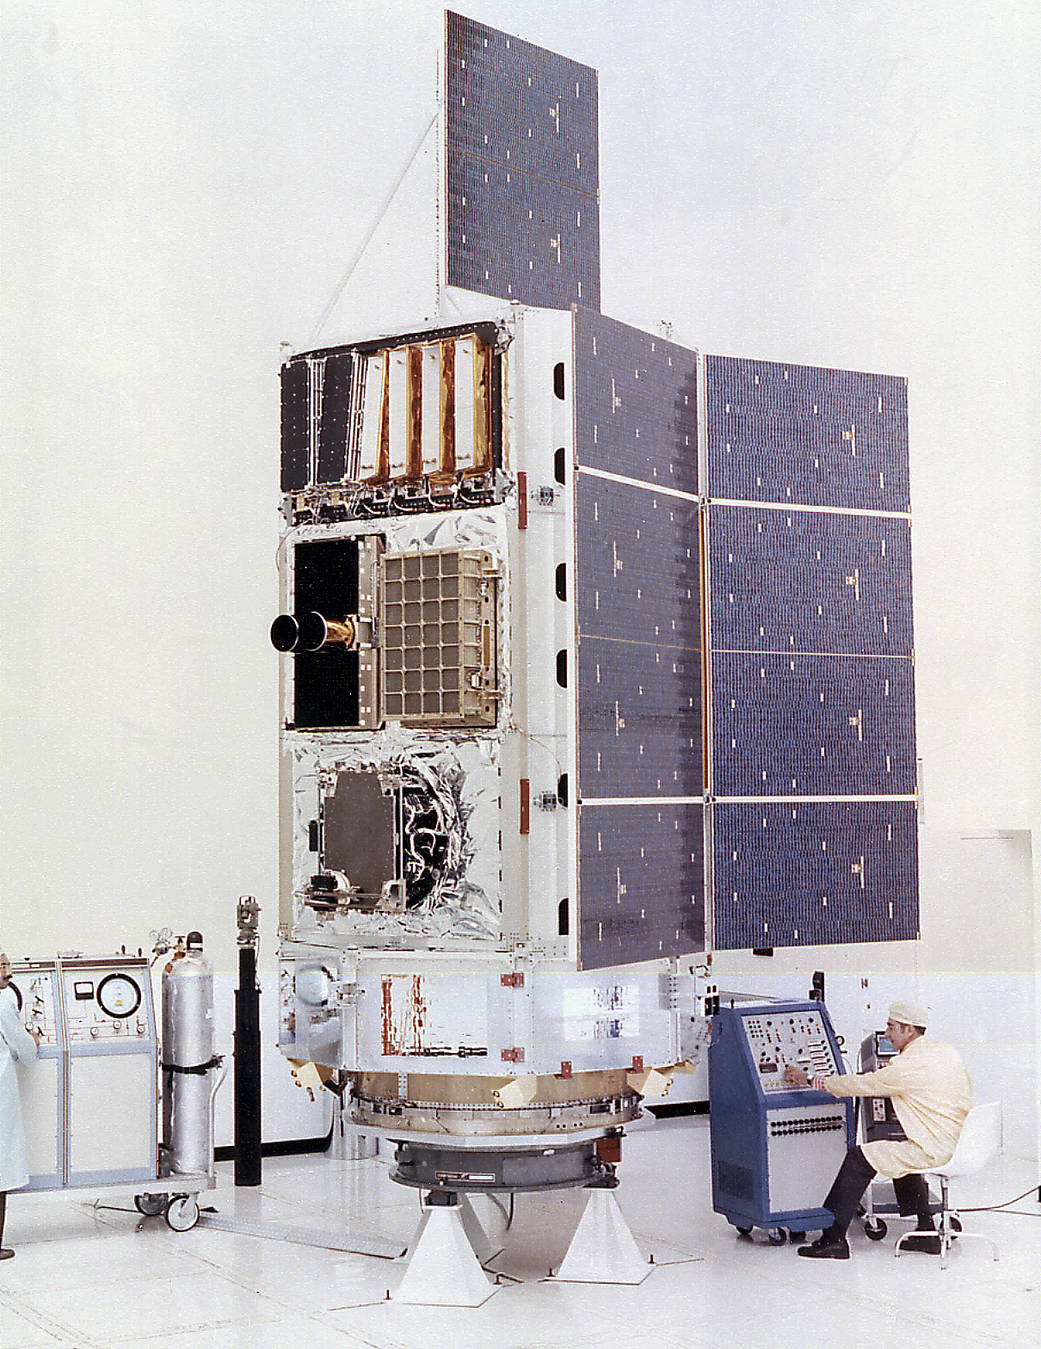 This week in 1977, the first of three spacecraft in NASA's High Energy Astronomy Observatory program, HEAO-1, was launched.